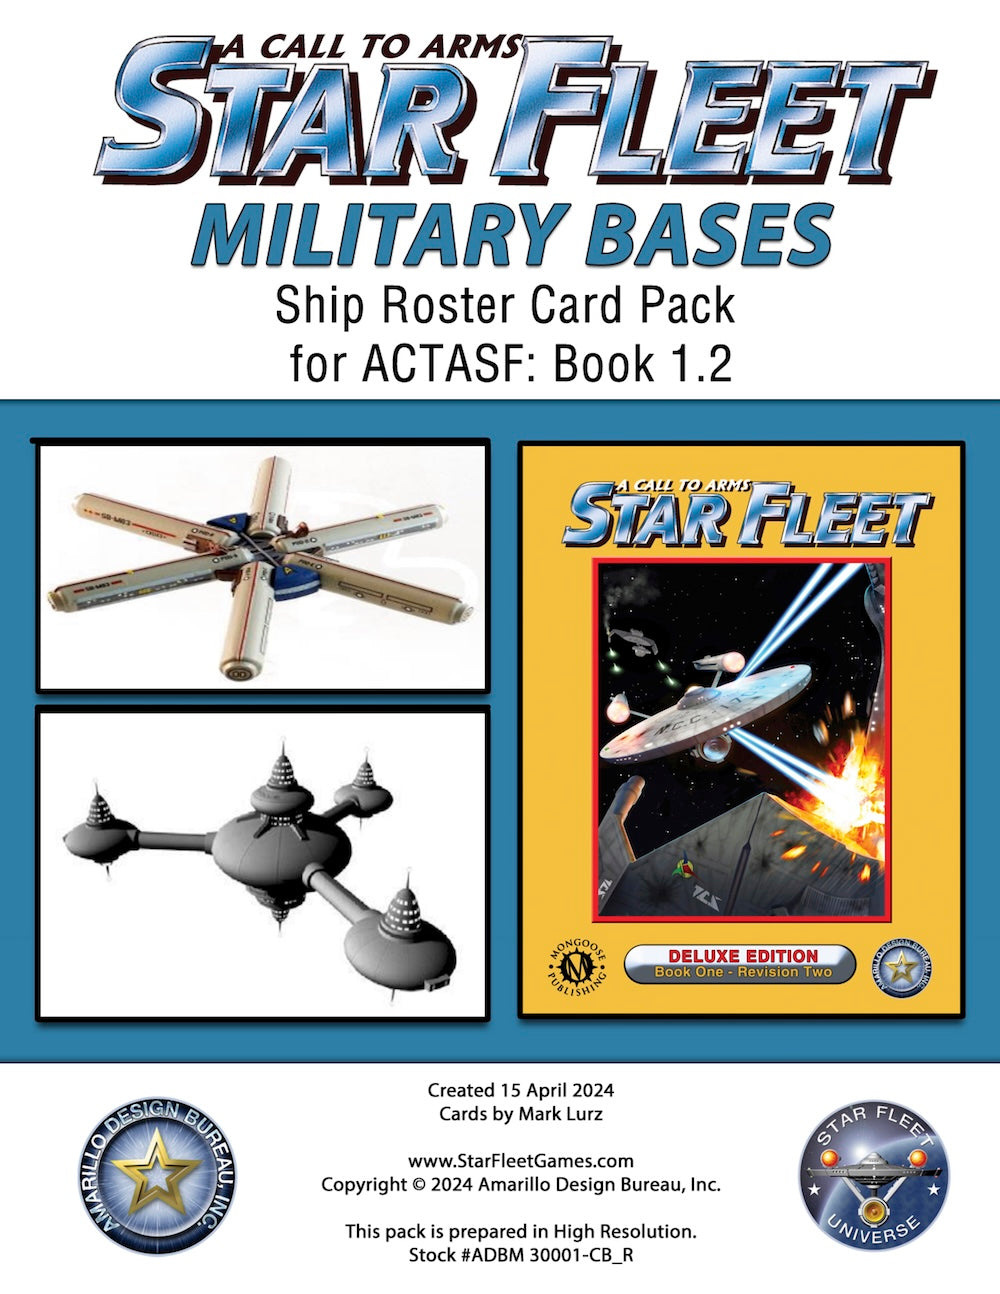 A Call to Arms: Star Fleet, Book 1.2: Military Bases Ship Roster Card Pack